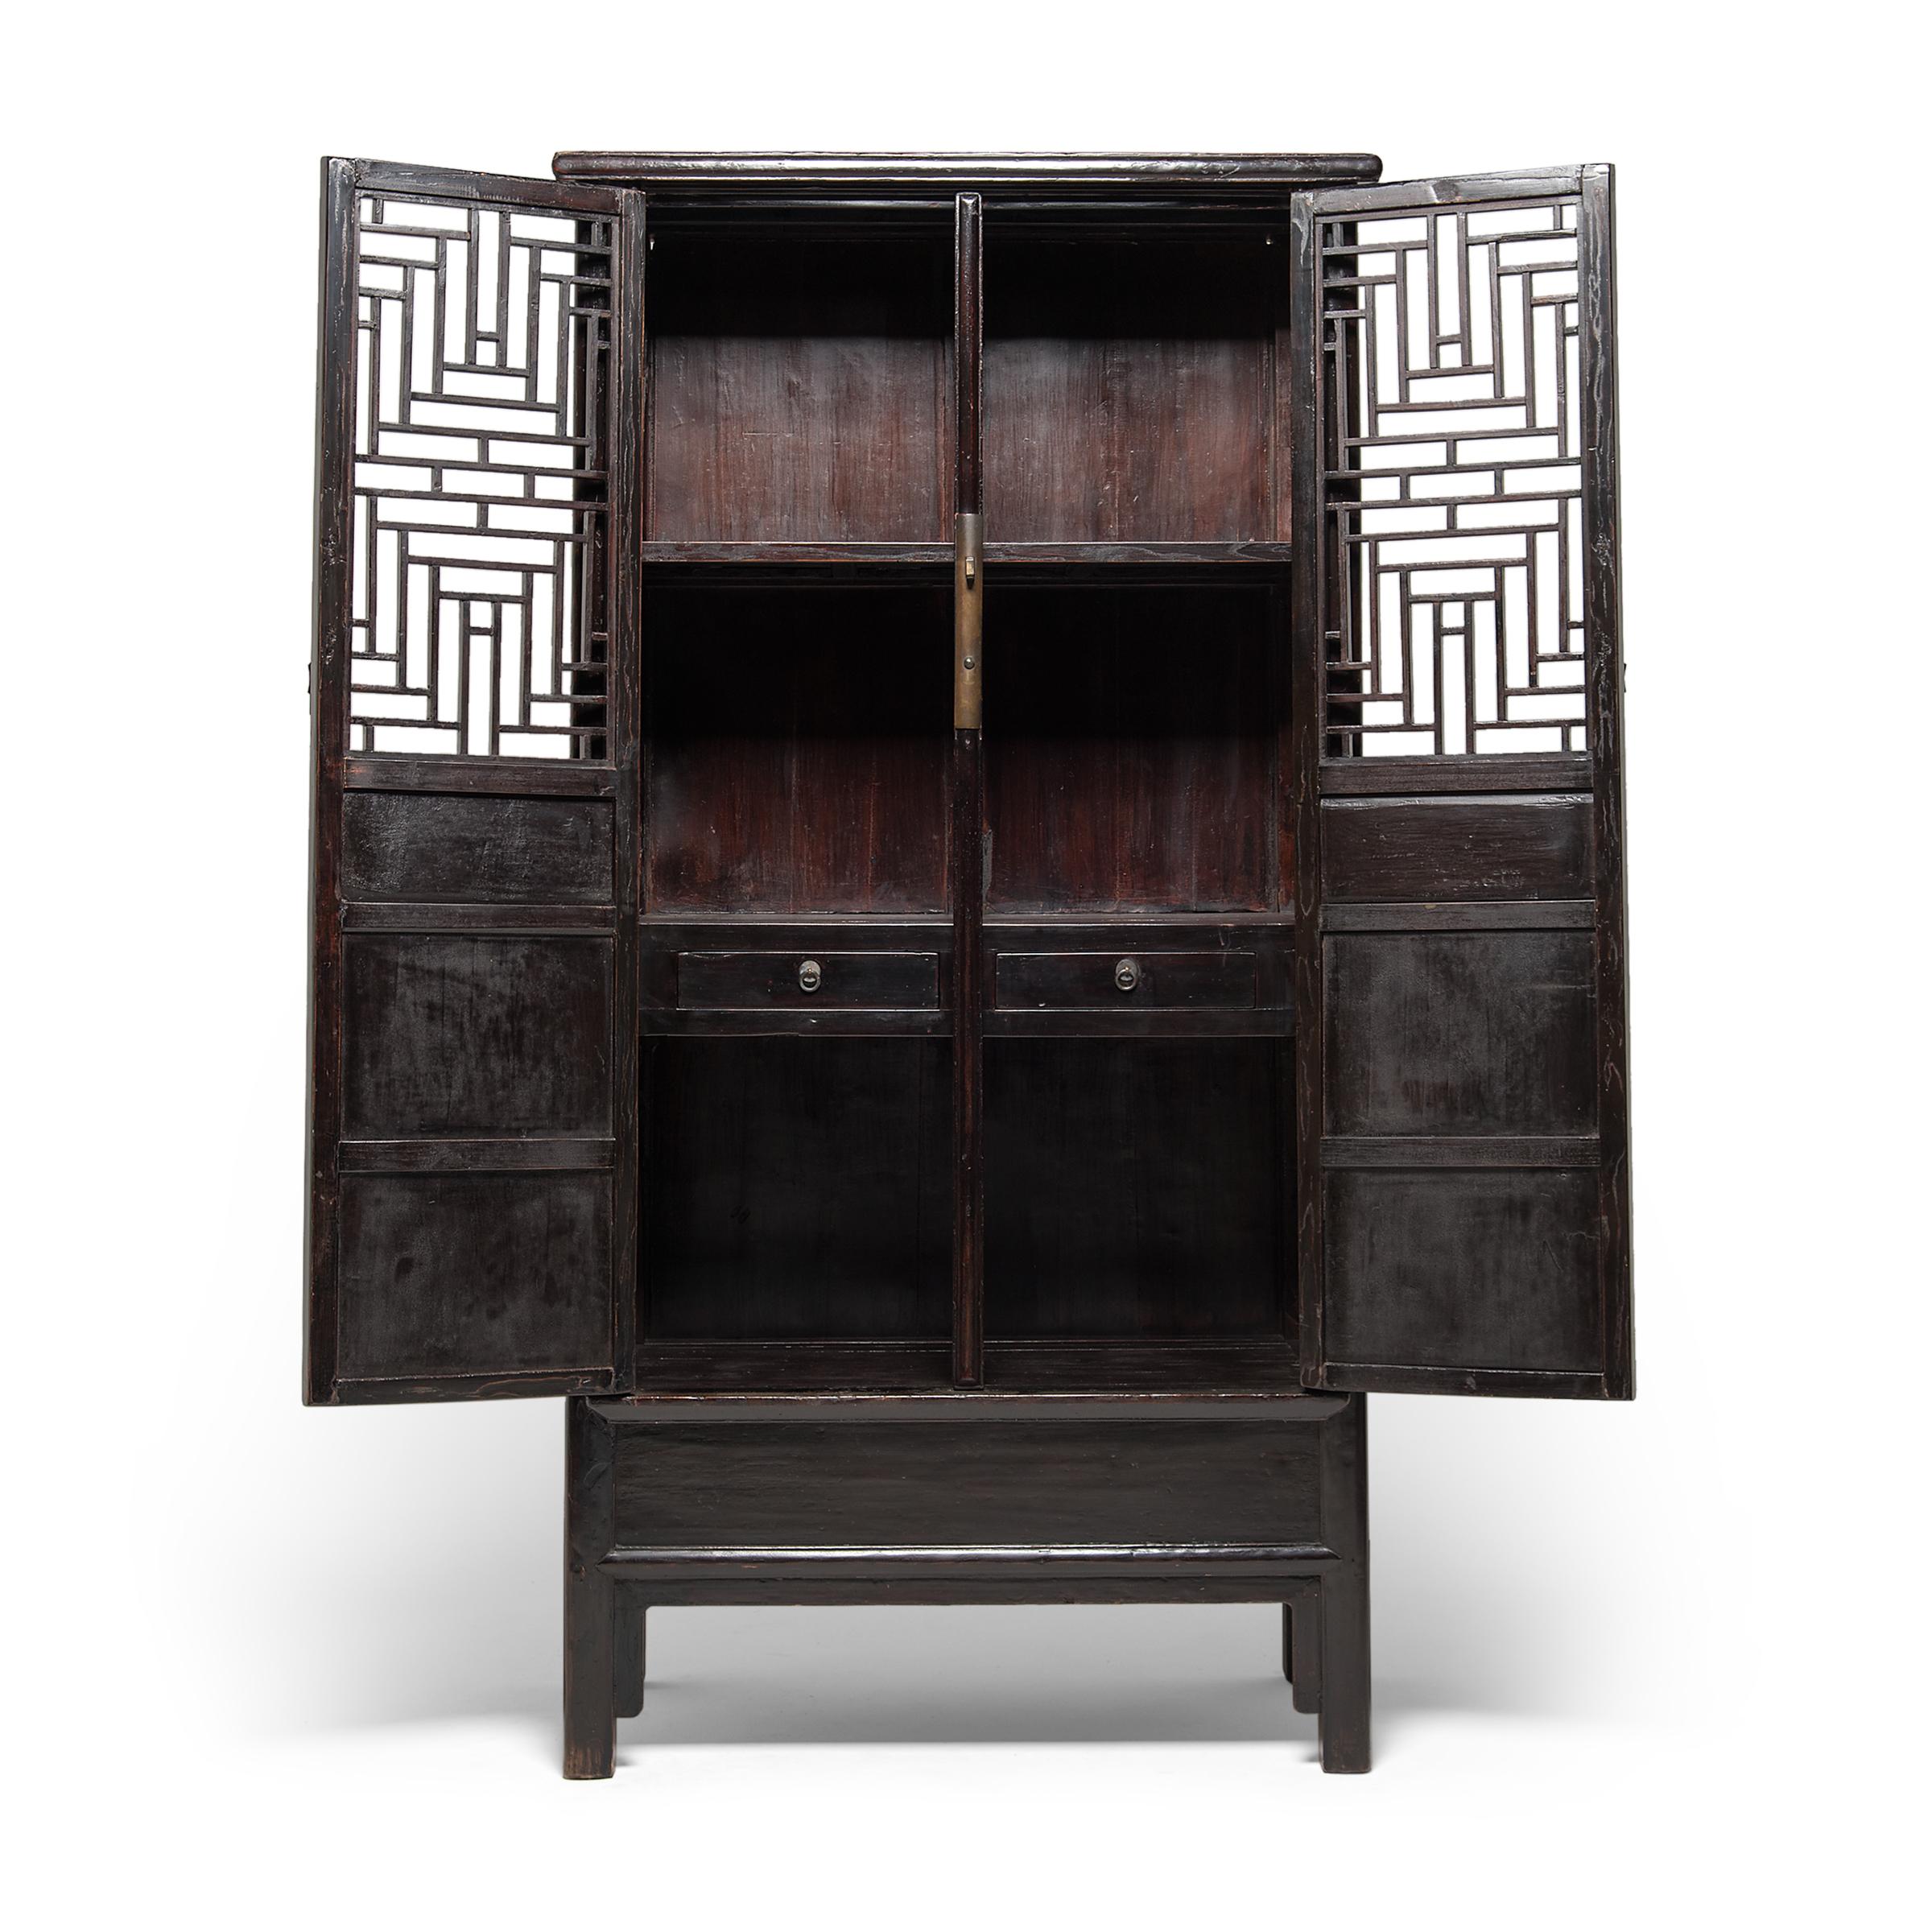 Chinese Diamond Lattice Display Cabinet, c. 1850 In Good Condition For Sale In Chicago, IL